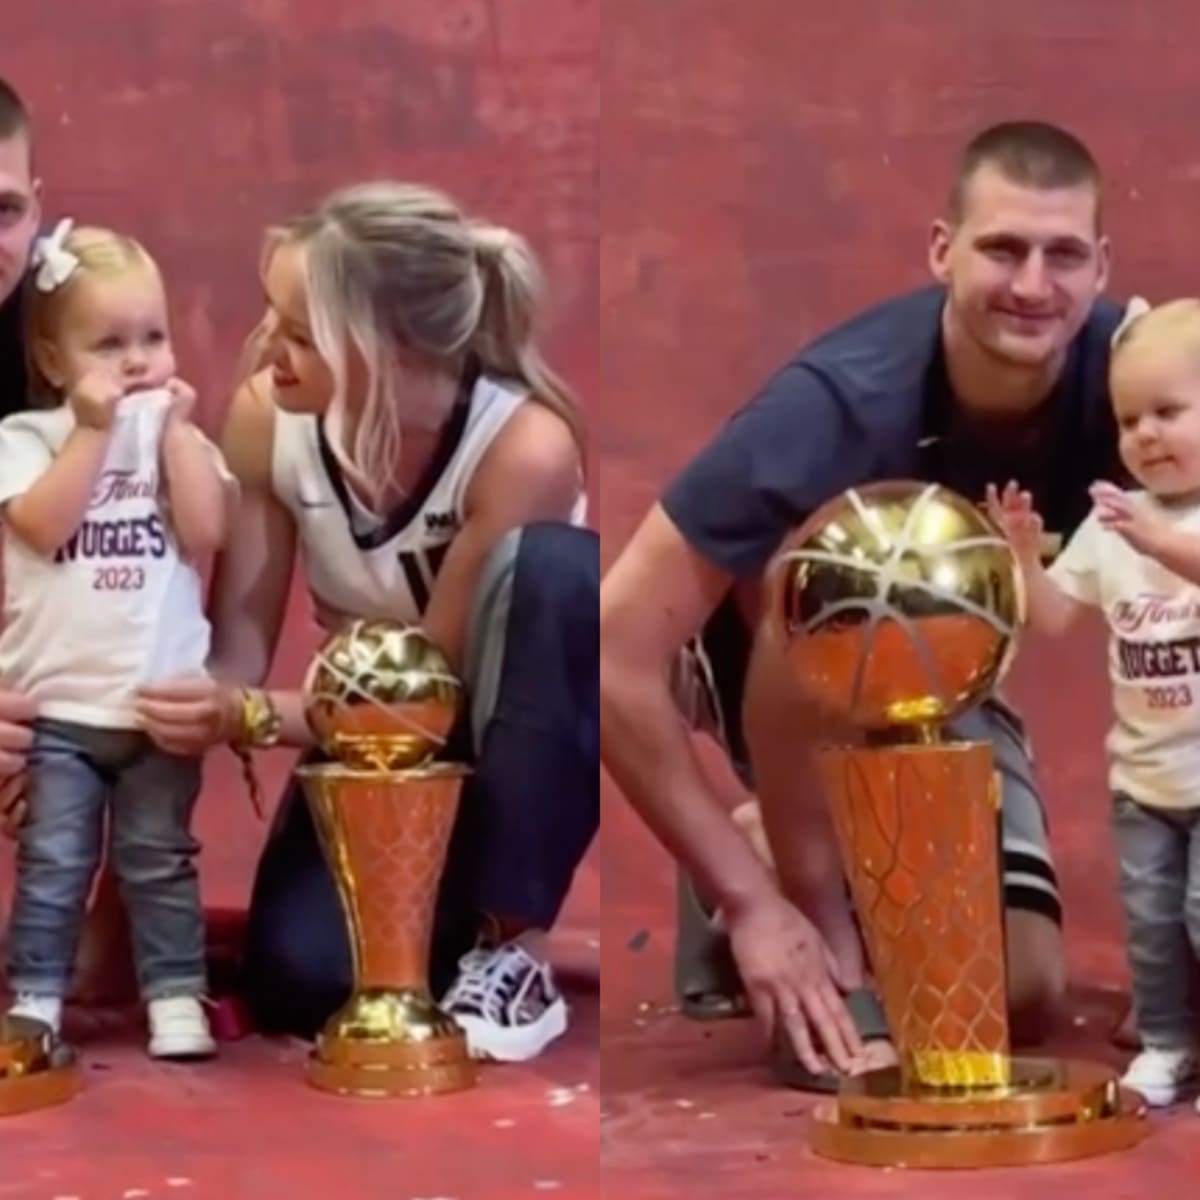 Nikola Jokic Shares A Wholesome Moment With His Wife And Daughter After  Winning The NBA Championship And Finals MVP - Fadeaway World